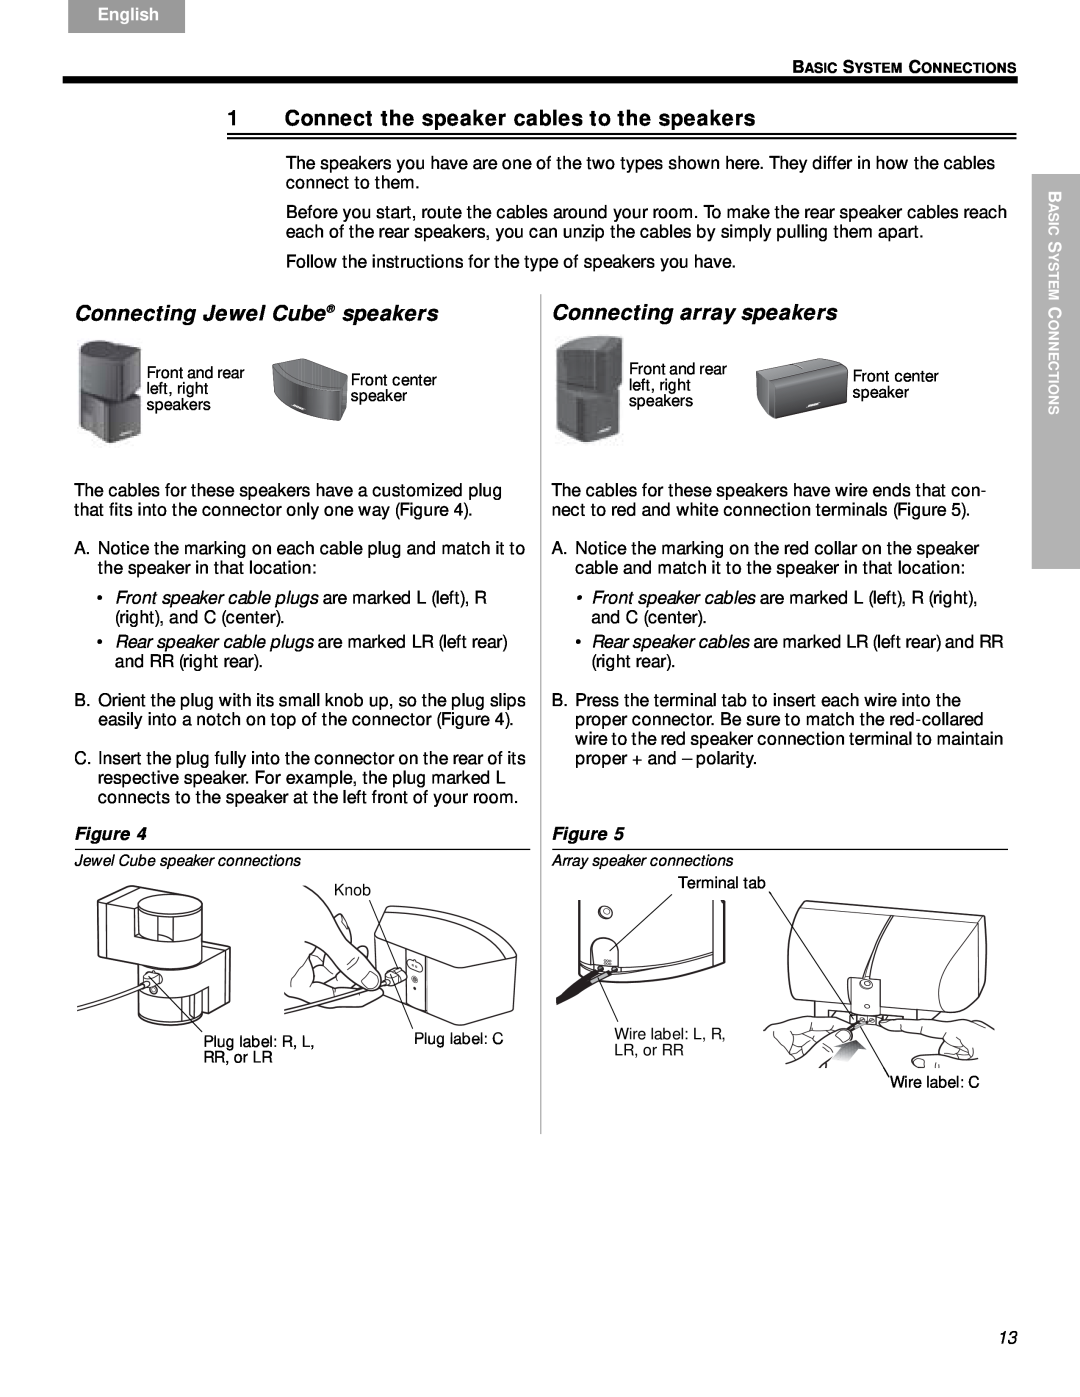 Bose VS-2 Connect the speaker cables to the speakers, Connecting Jewel Cube speakers, Connecting array speakers, English 